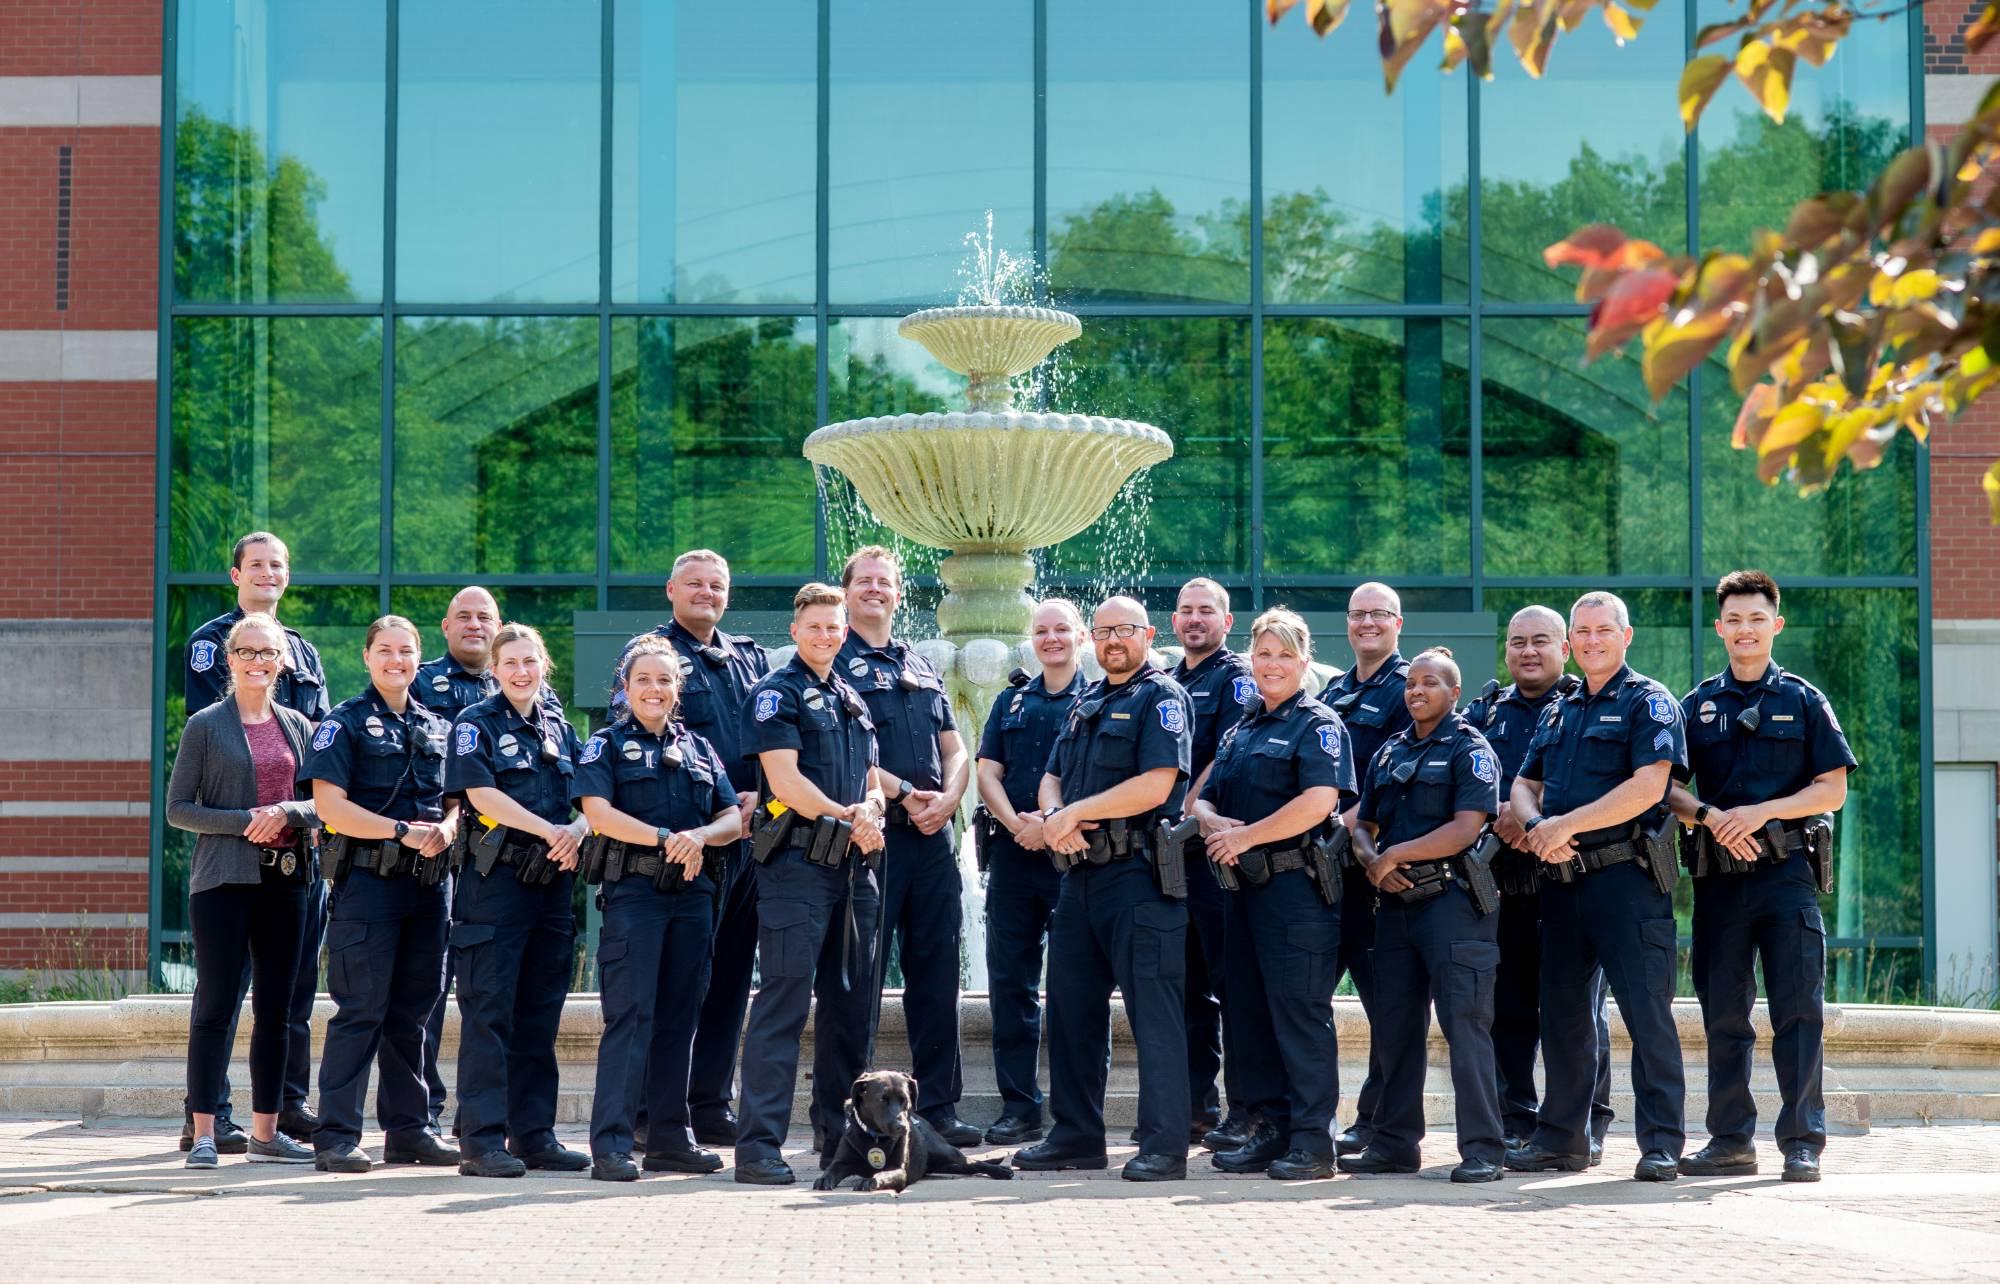 GVPD police officers in a staggered line, wearing their blue patrol uniforms, posing in front of the Student Services fountain. K9 dog Koda is laying in front. One officer, a detective is in plain clothes. The officers are smiling.